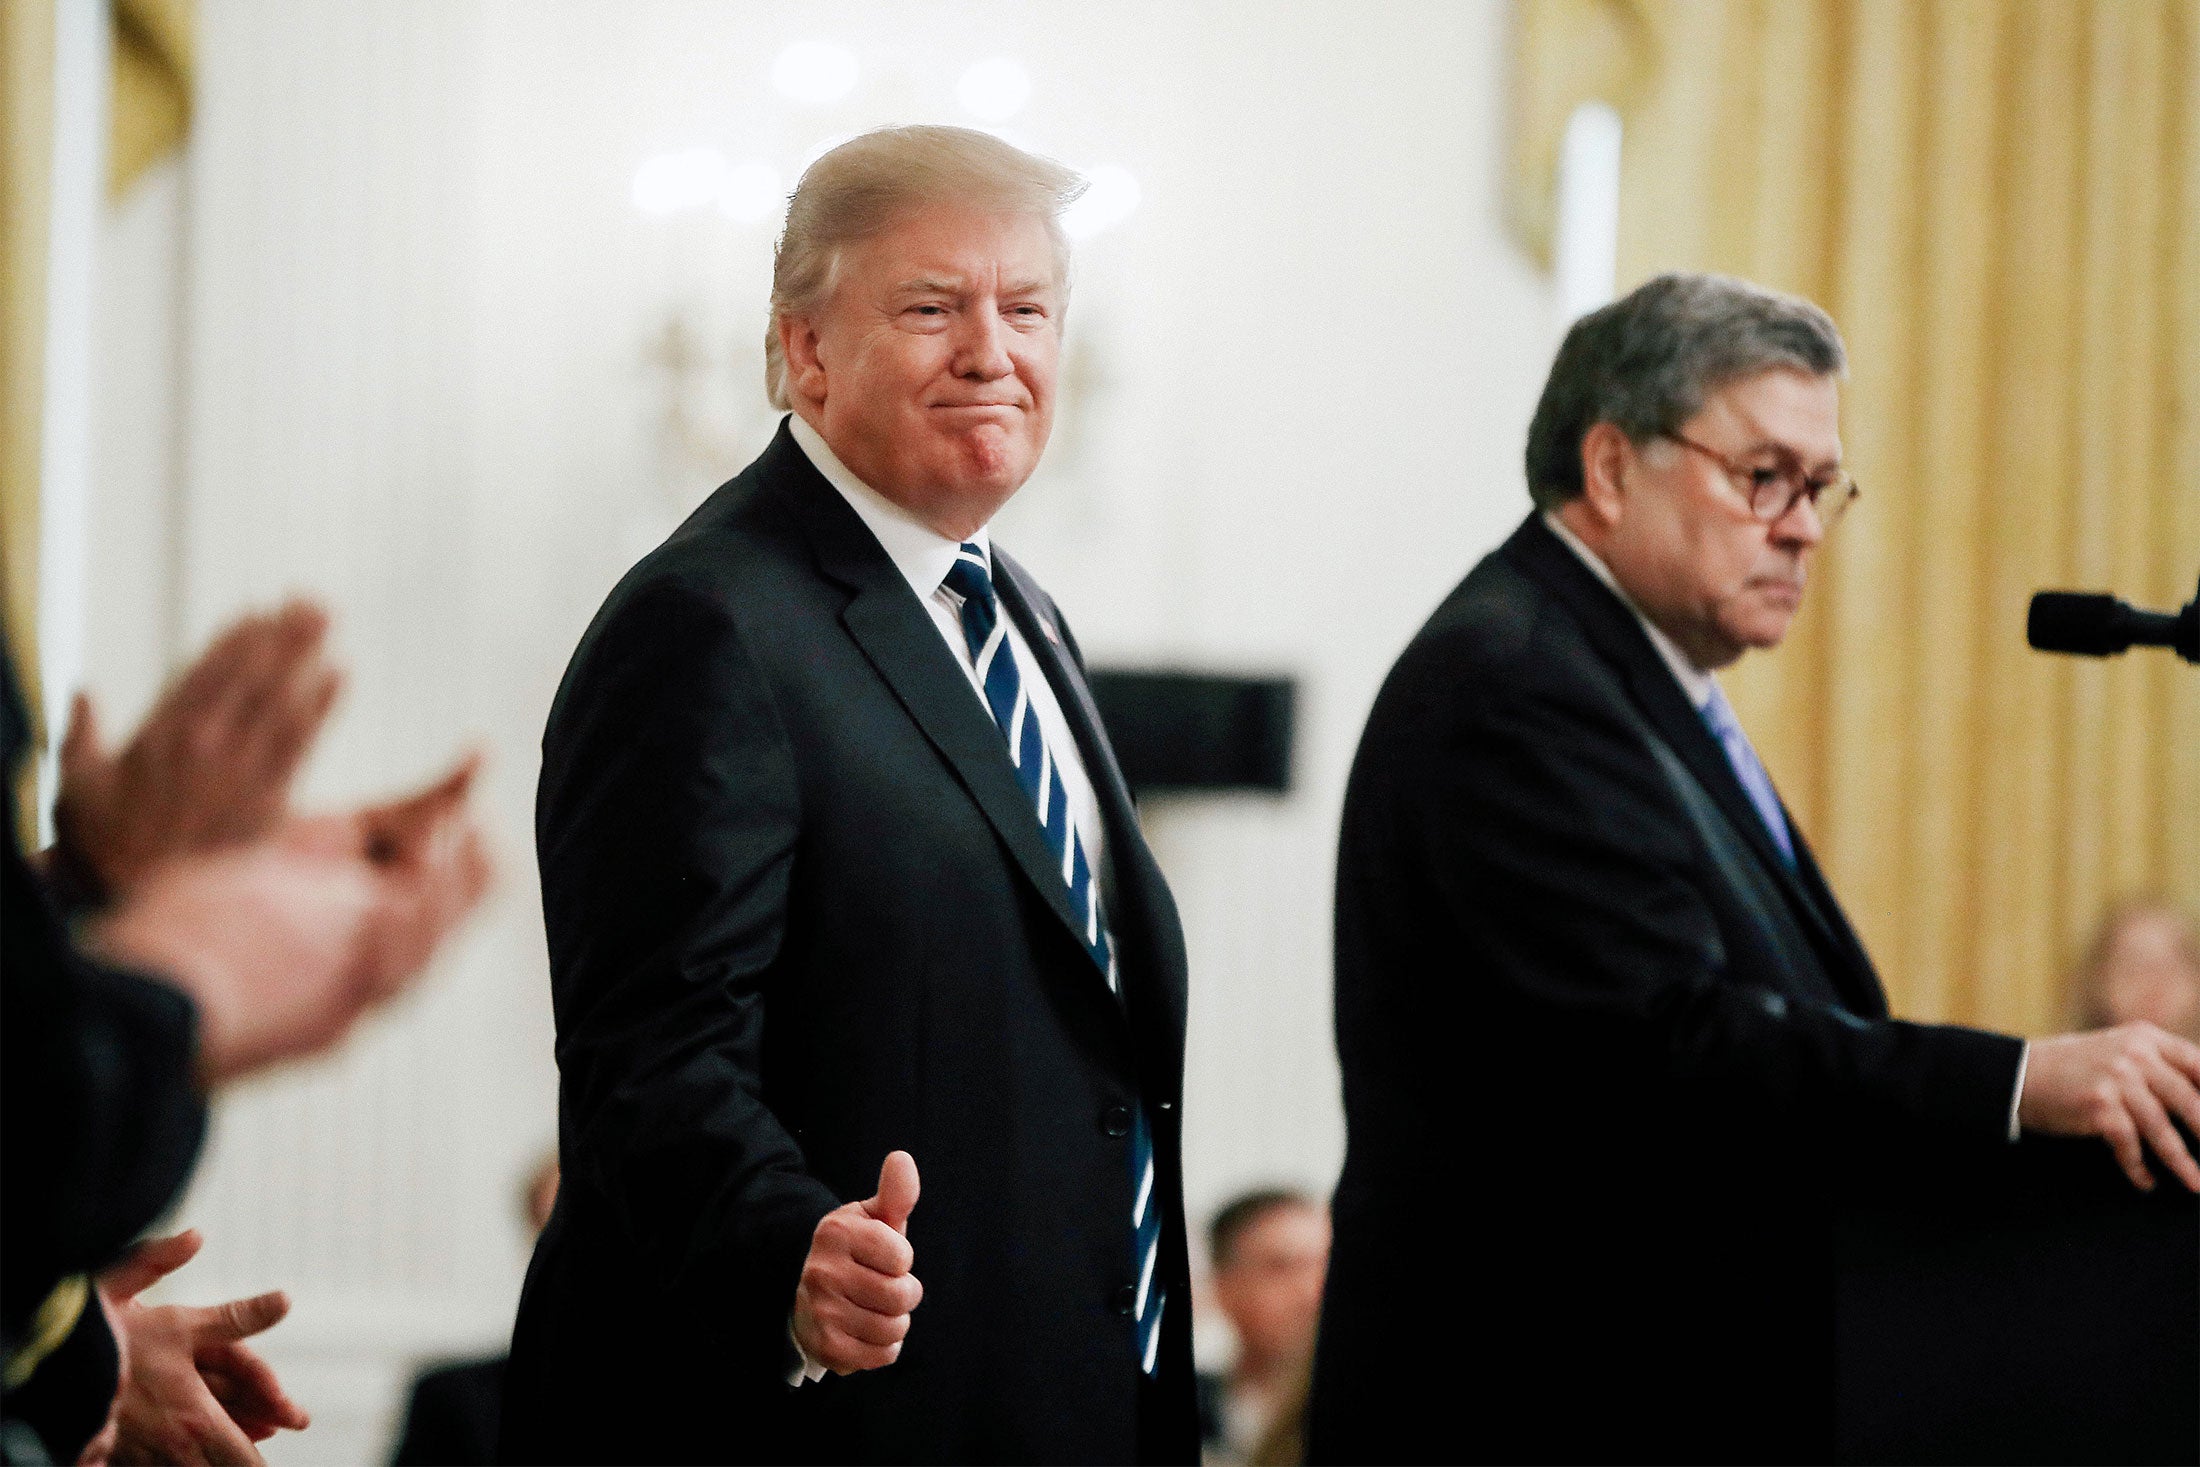 President Donald Trump stands with Attorney General William Barr on May 22 in Washington.